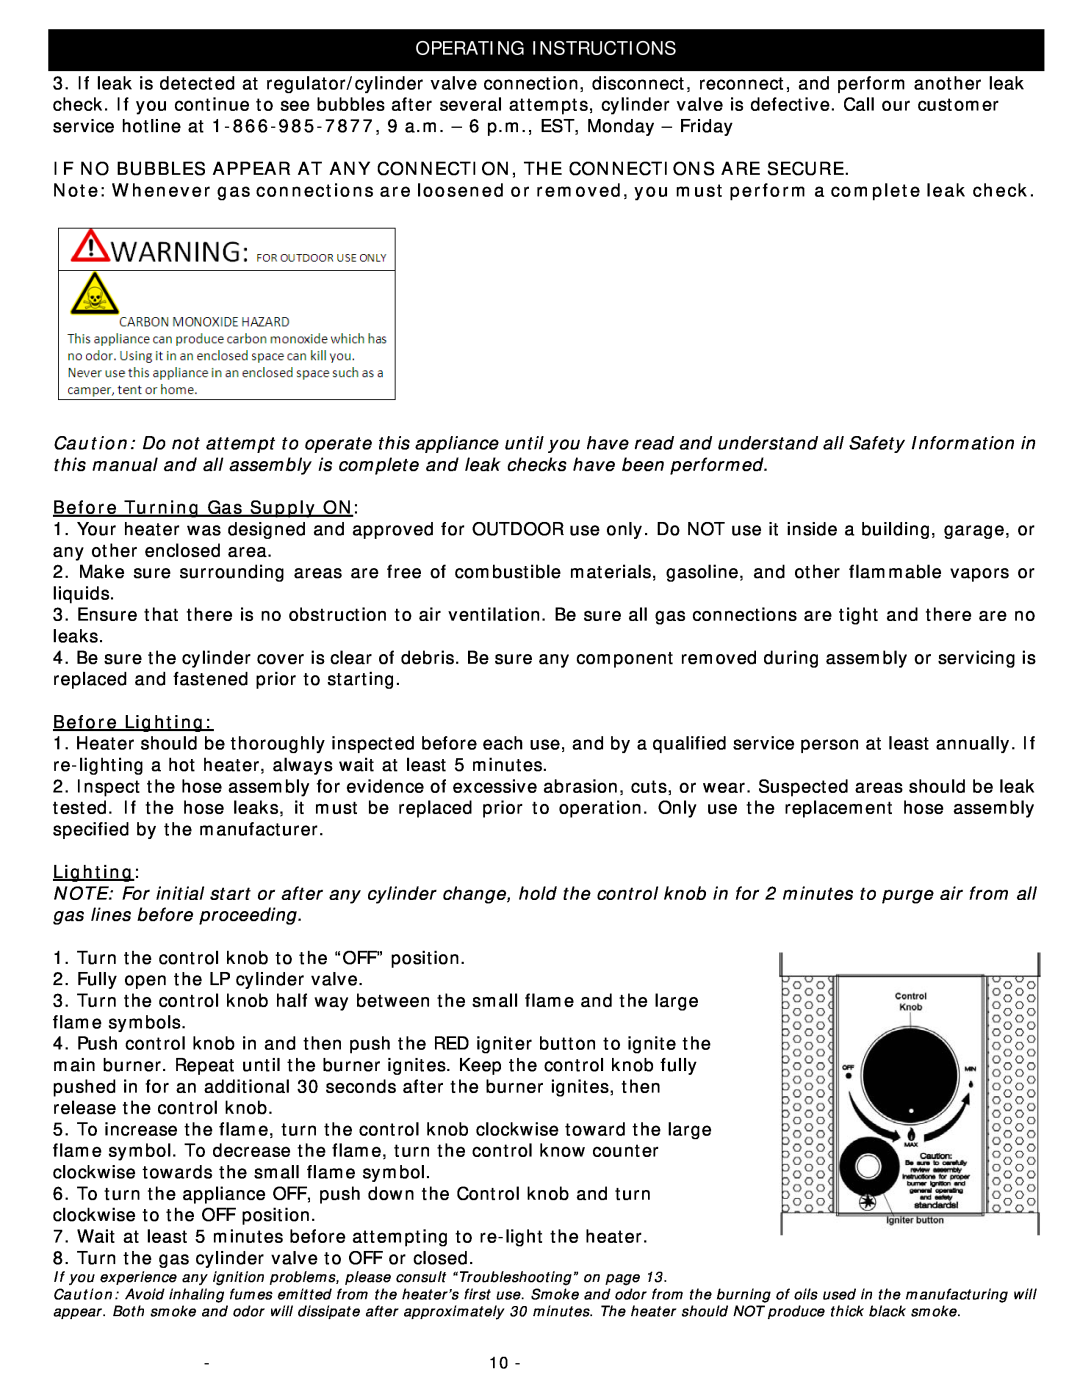 Well Traveled Living LIP-10A-TGG-LPG-SP manual Operating Instructions, Before Turning Gas Supply ON, Before Lighting 